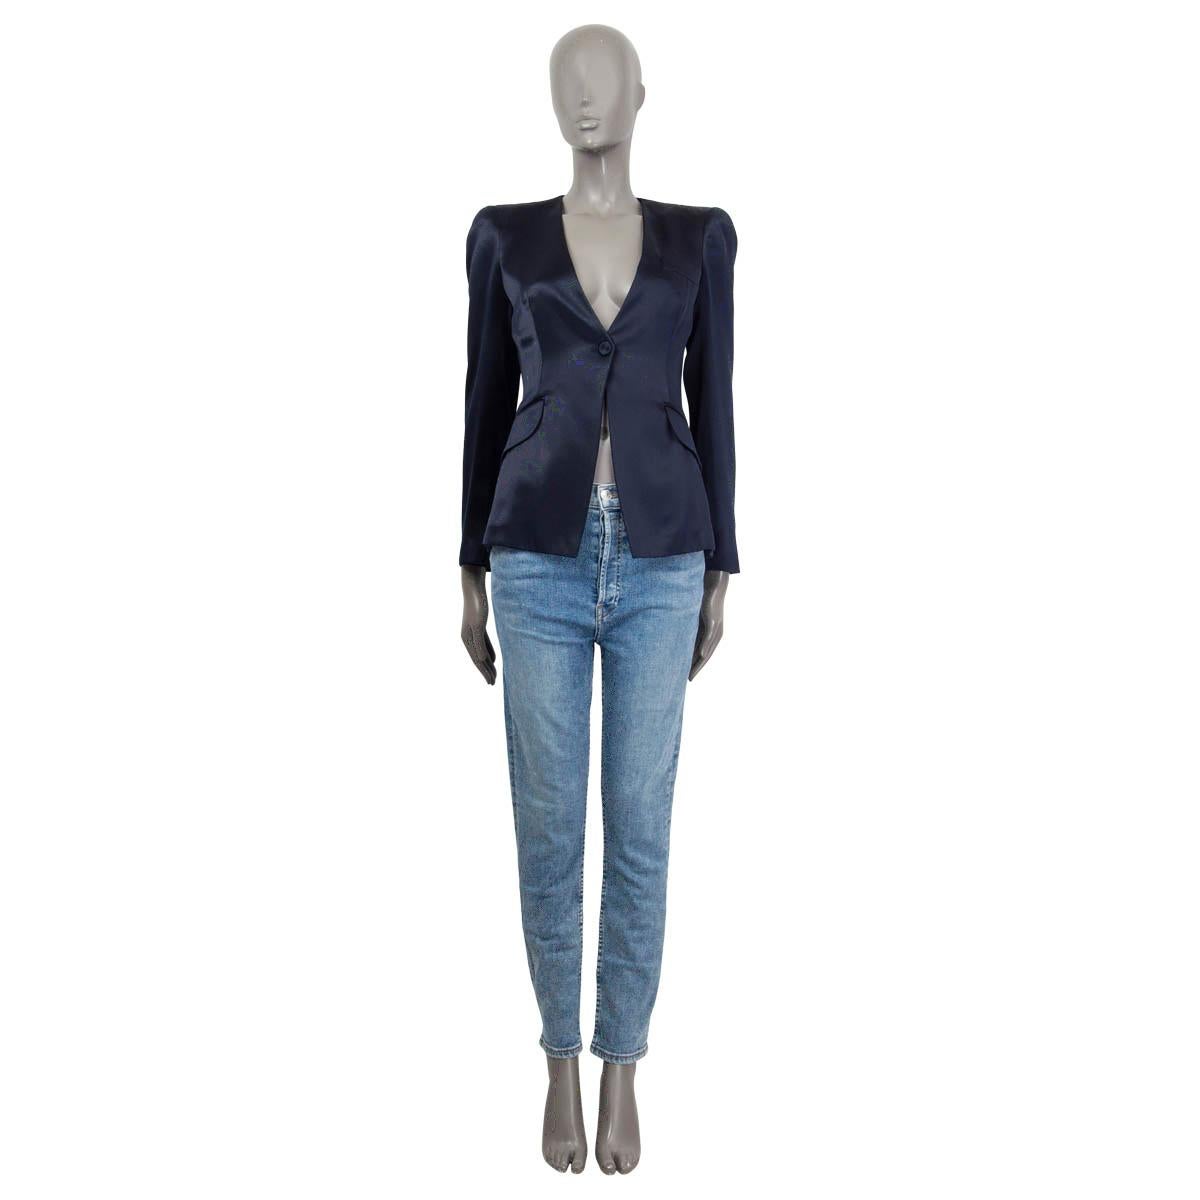 100% authentic Alexander McQueen satin blazer in midnight blue silk (100%). Features padded shoulders and buttoned cuffs. Has two sewn shut flap pockets and one chest pocket at the front. Opens with one button on the front. Lined in midnight blue